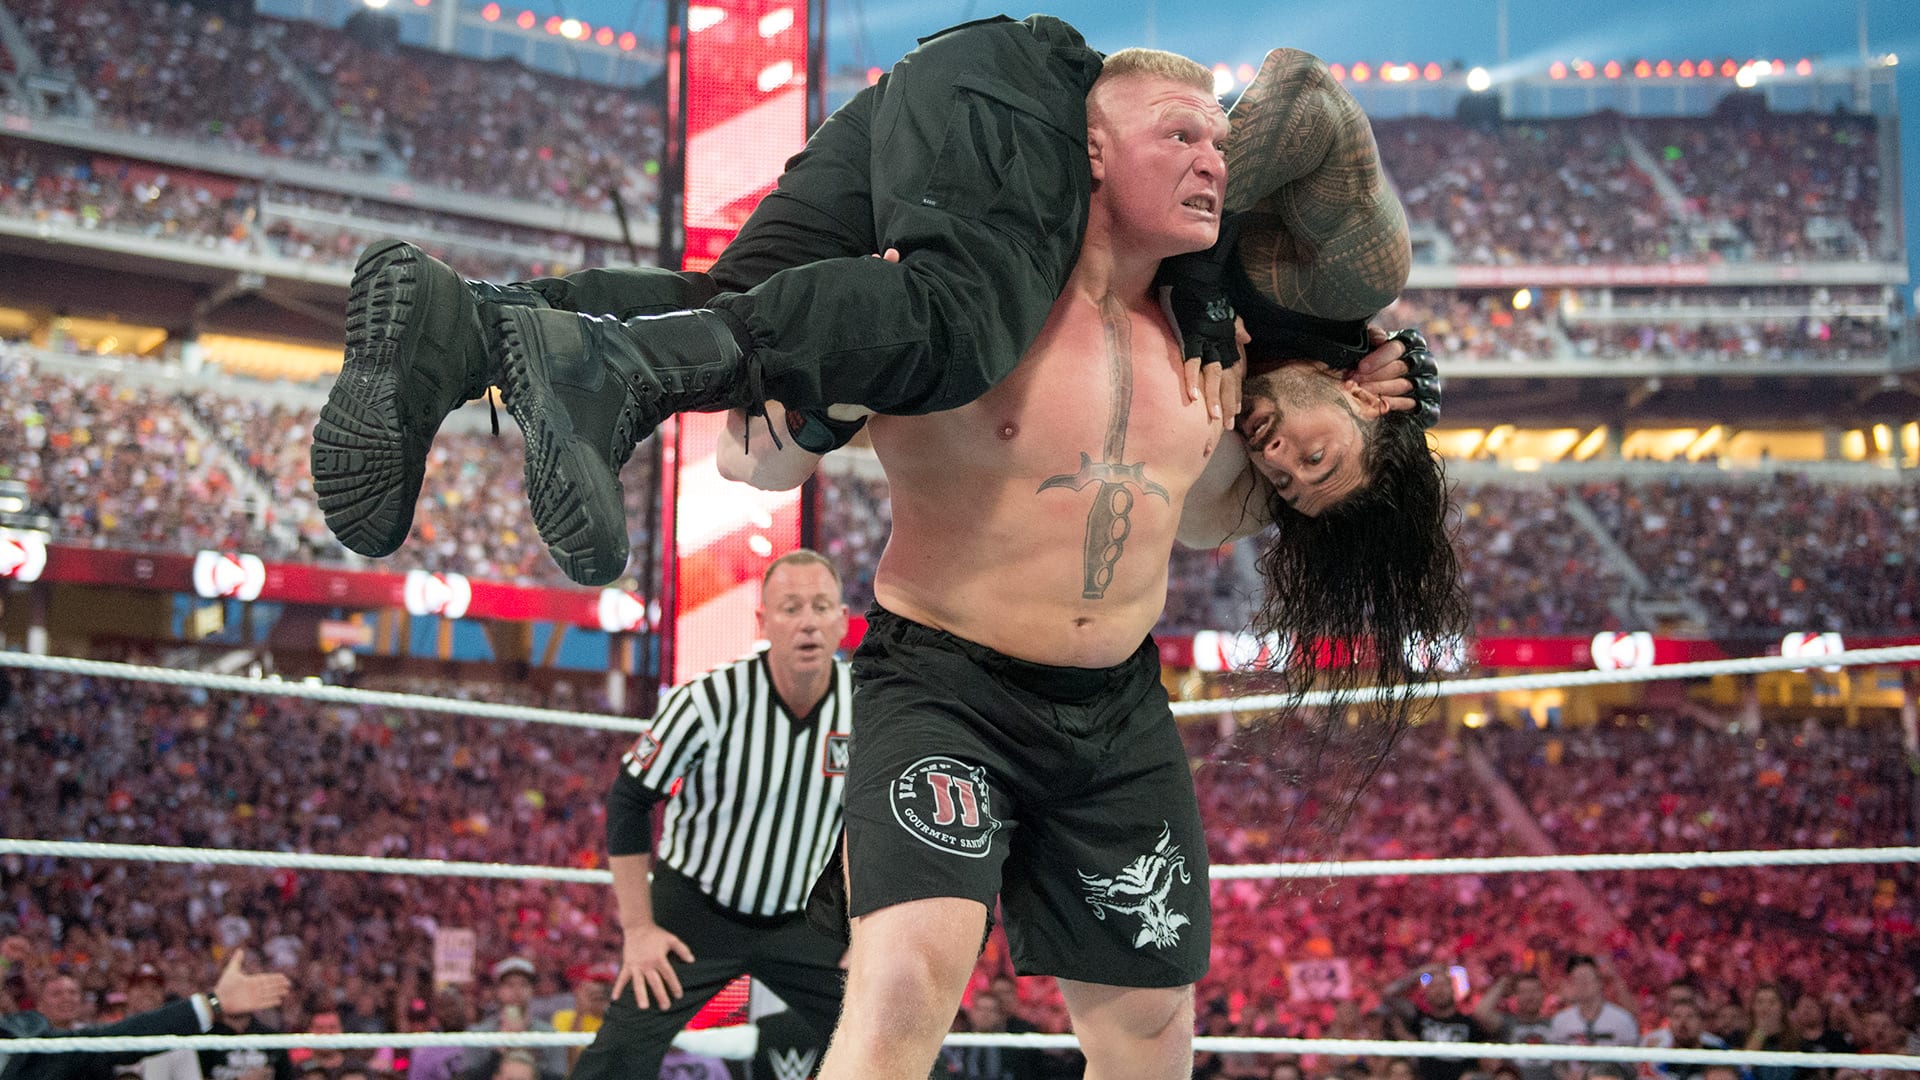 Brock Lesnar vs. Roman Reigns now taking place at SummerSlam 2017 instead of WrestleMania 34